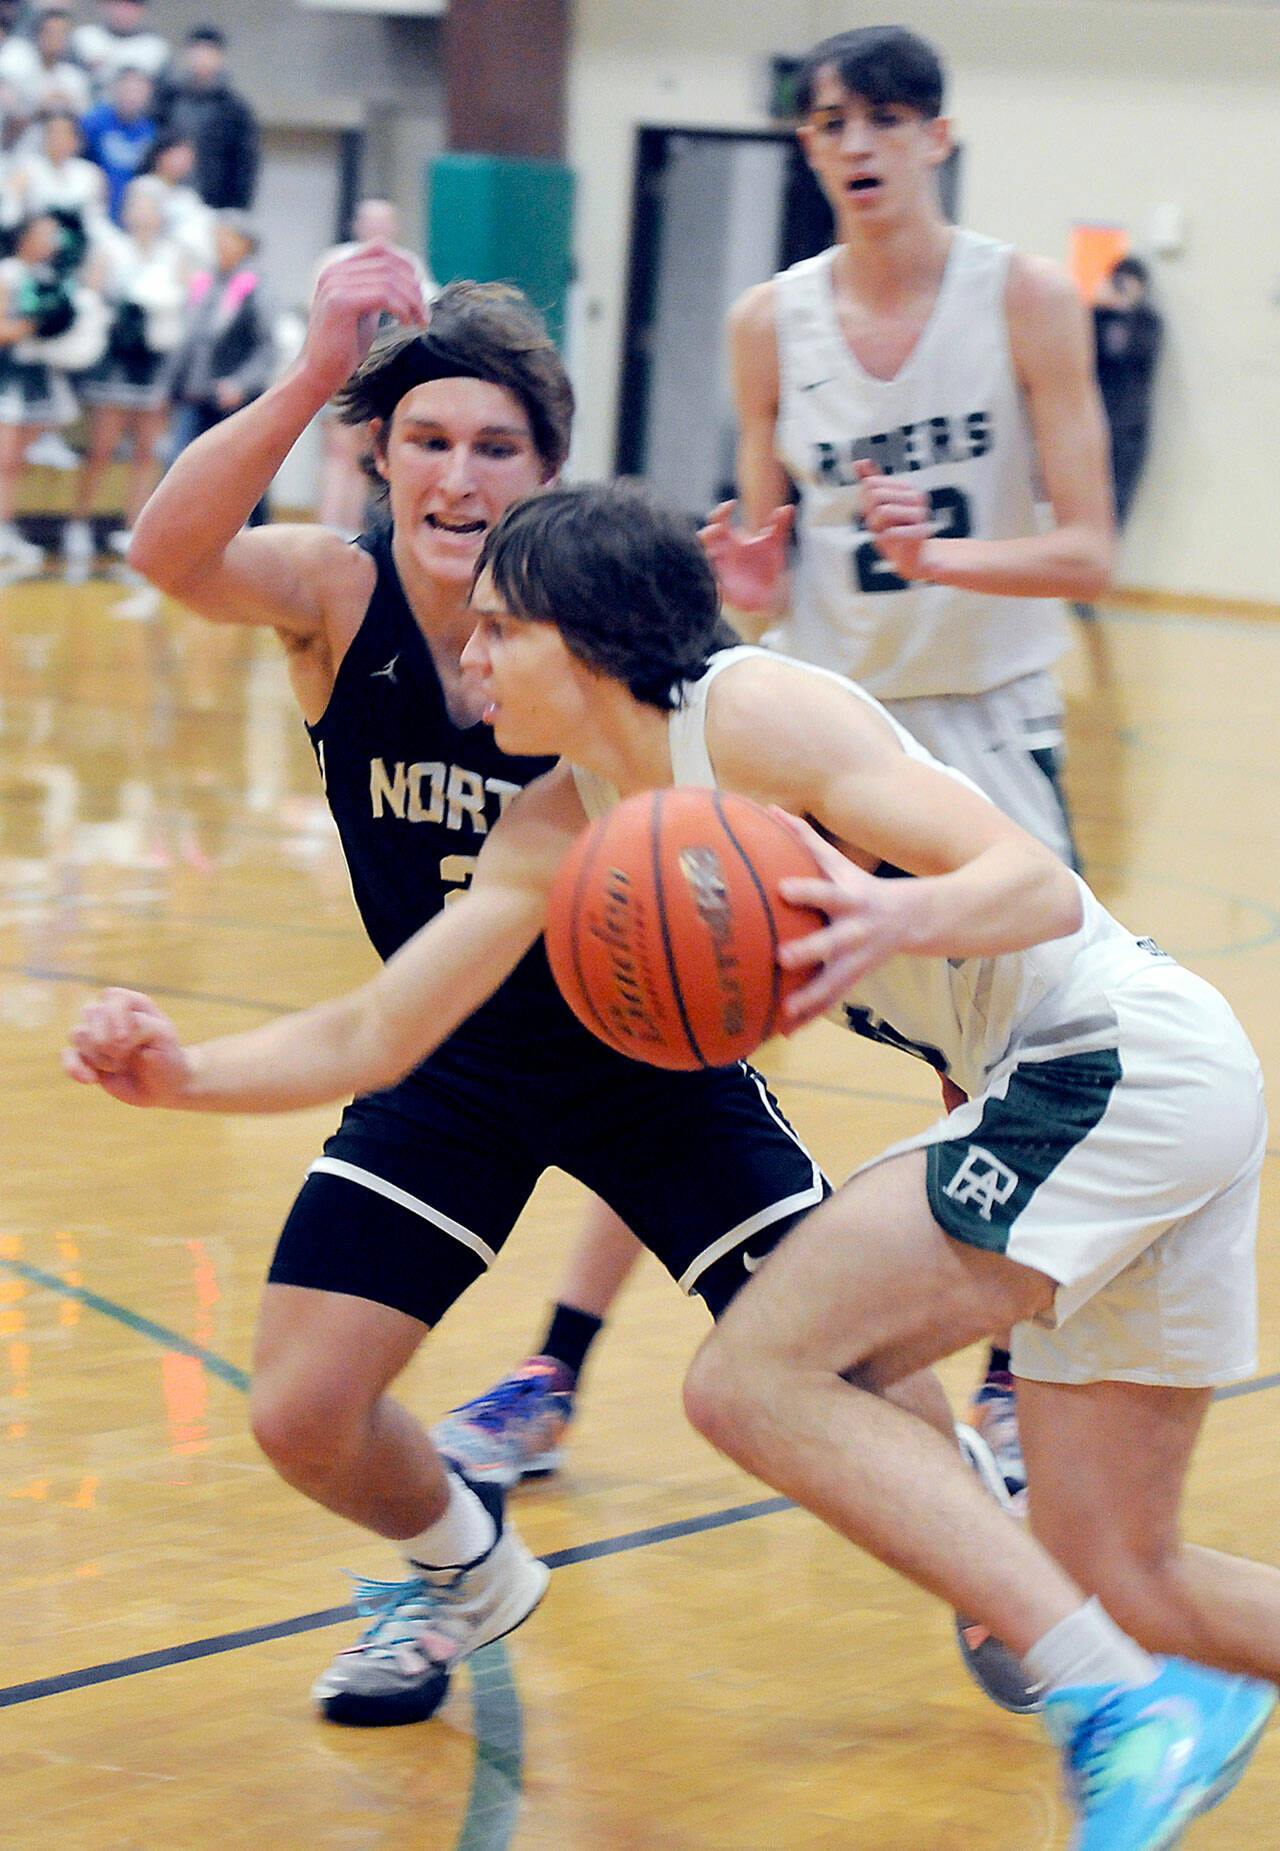 KEITH THORPE/PENINSULA DAILY NEWS Parker Nickerson of Port Angeles, front, drives to the lane as North Kitsap’s Mason Chmielewski defends his territory while Nickerson’s teammate, Tyler Hunter, looks on from behind on Thursday night in Port Angeles.